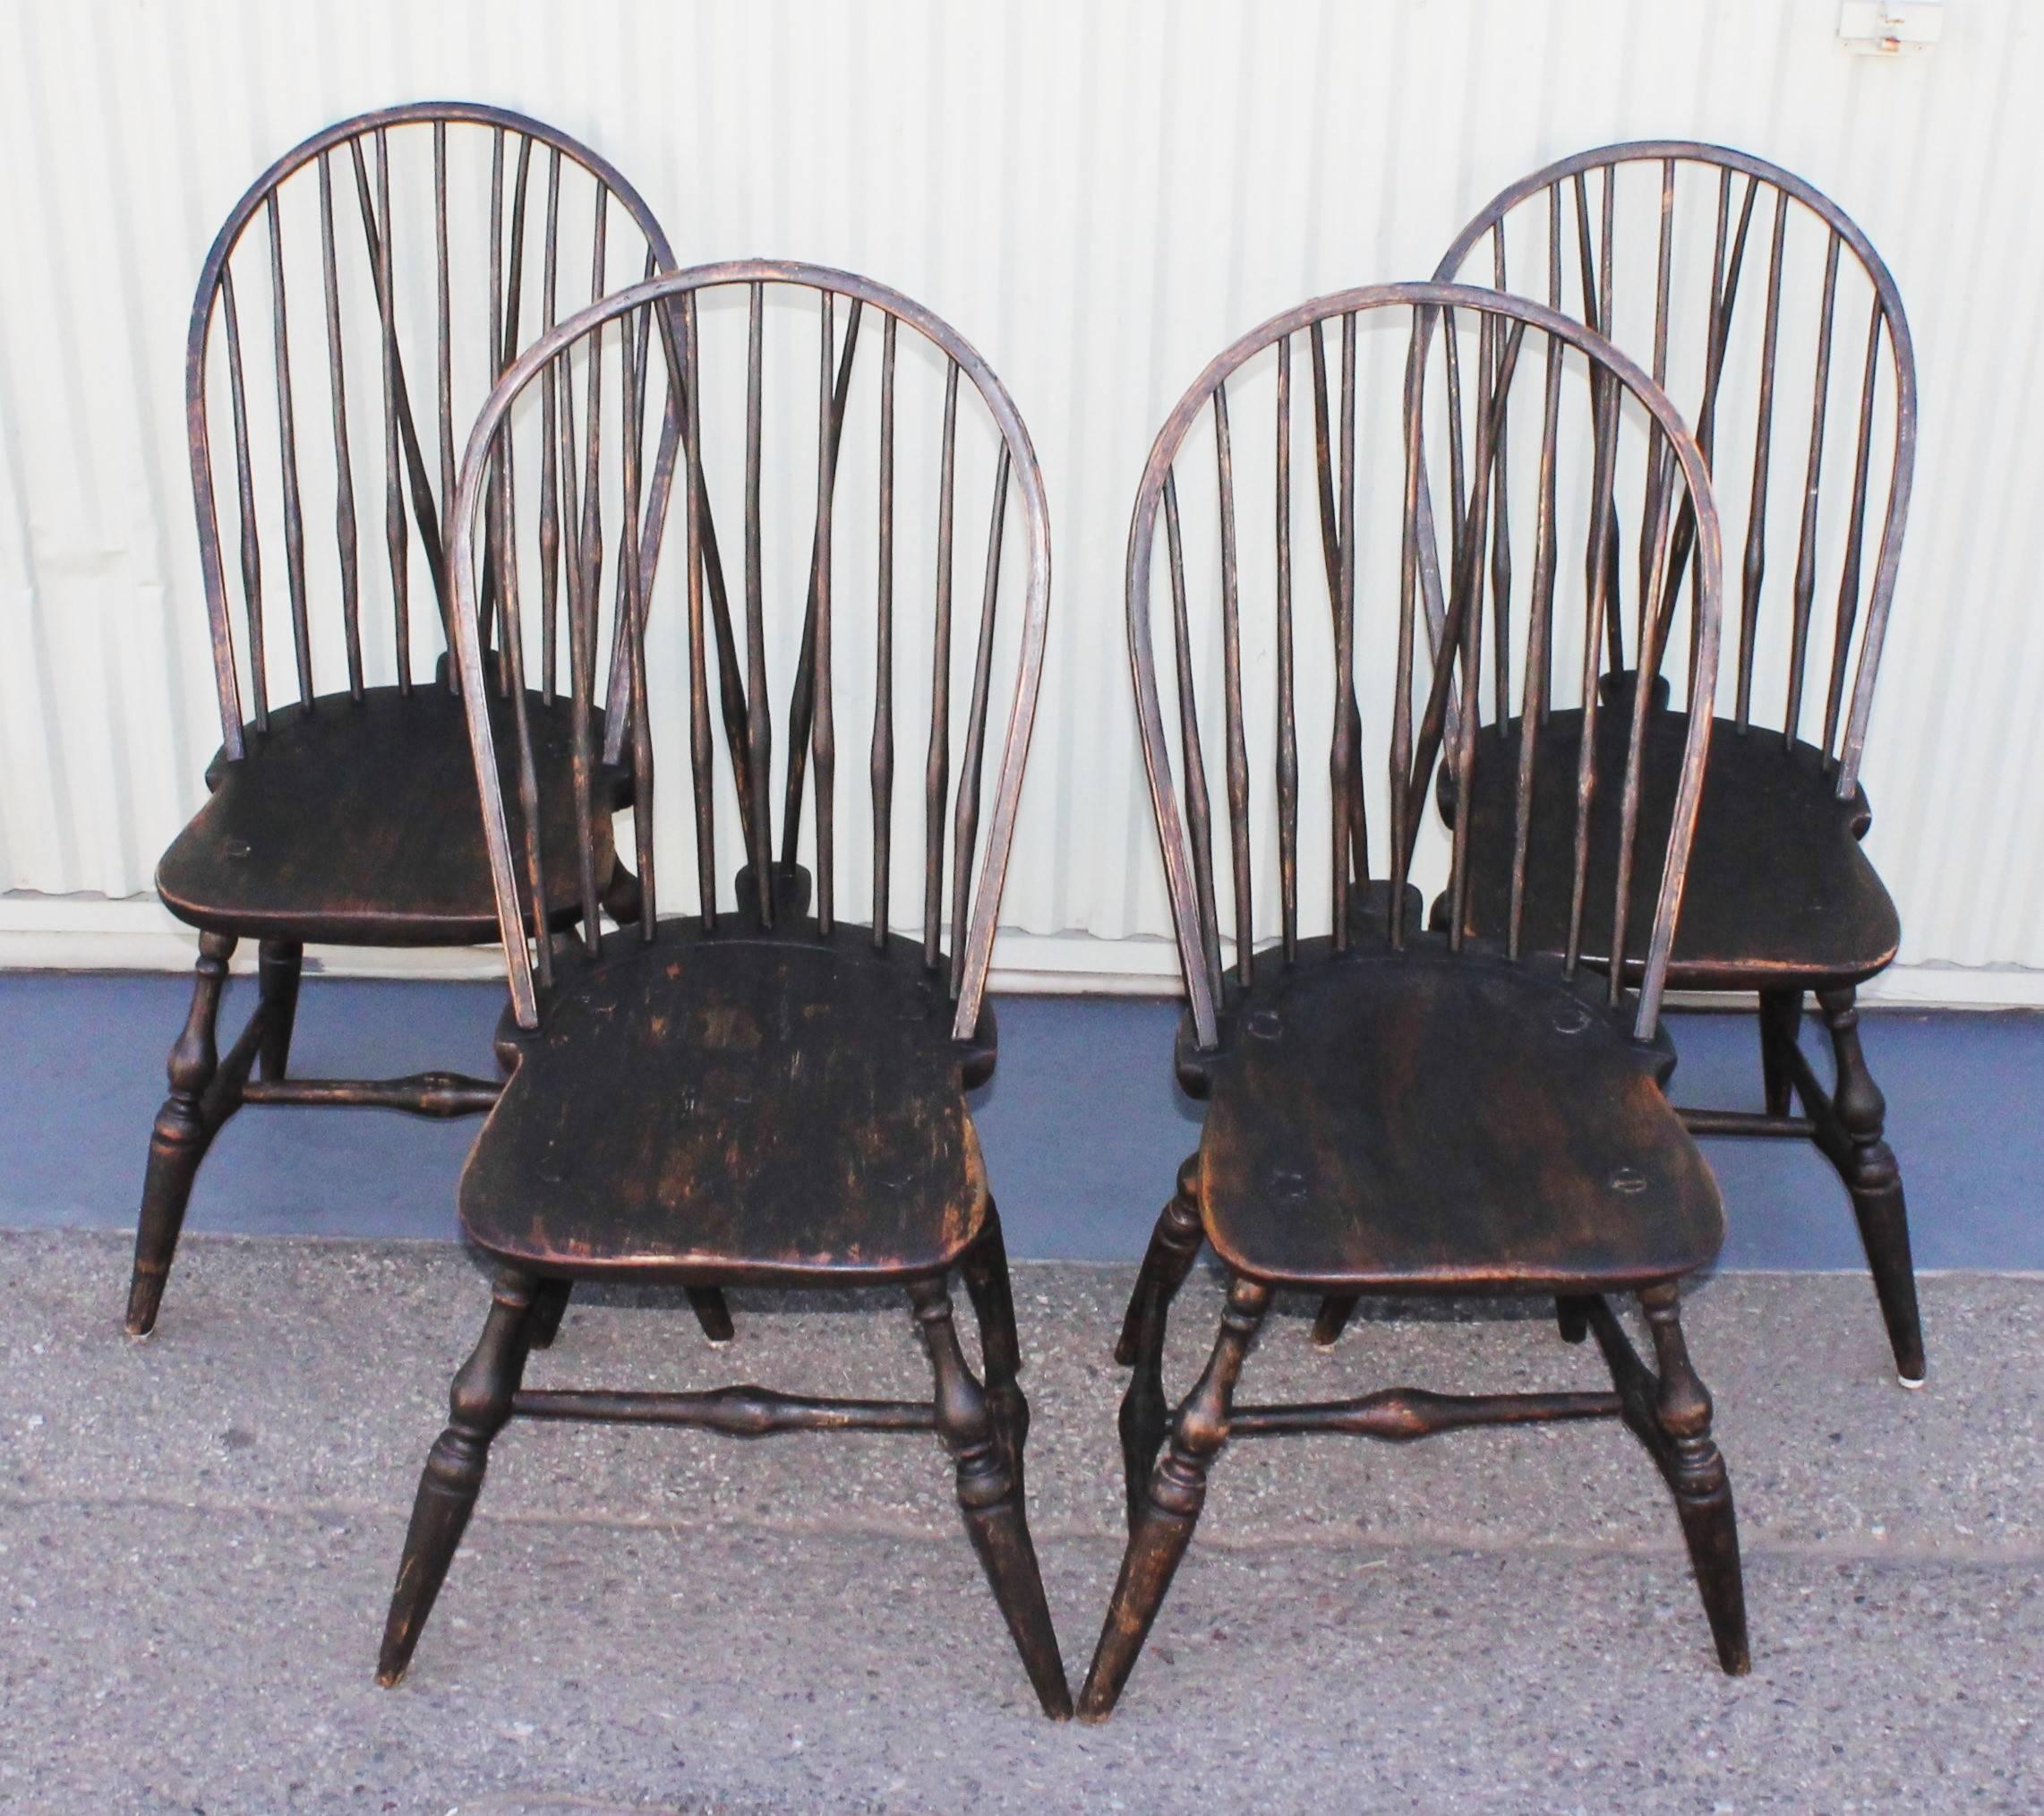 This fantastic set of four matching 18th century Windsor chairs are in great condition and very strong and sturdy. The painted surface is second generation or over painted with wear consistent from age and use. The chairs are very comfortable.